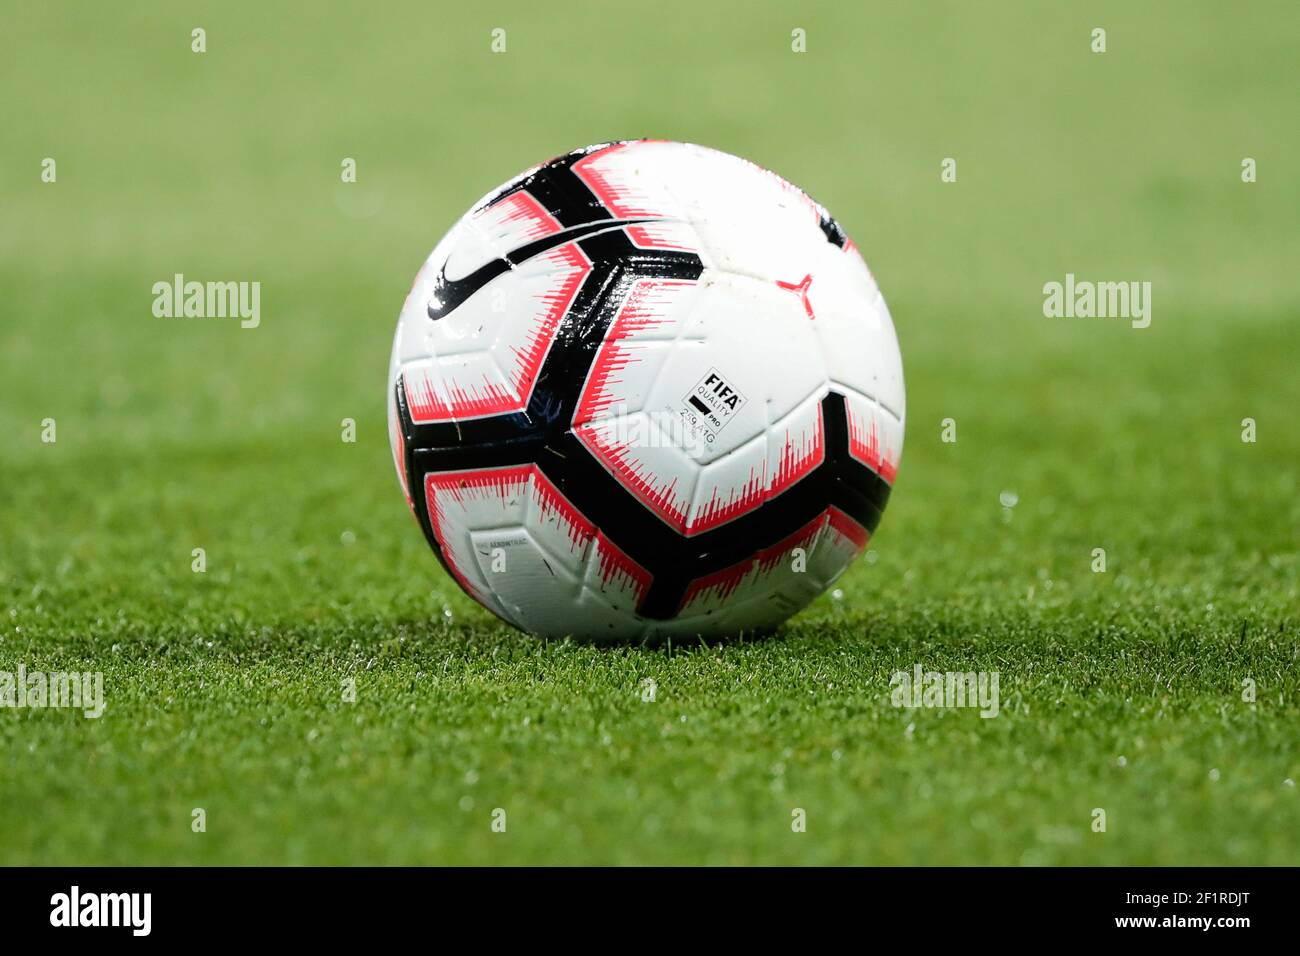 FIFA Nike official ball of French Cup illustration during the French Cup, semifinal football match Paris Saint-Germain and Nantes on April 3, 2019 Parc des Princes stadium in